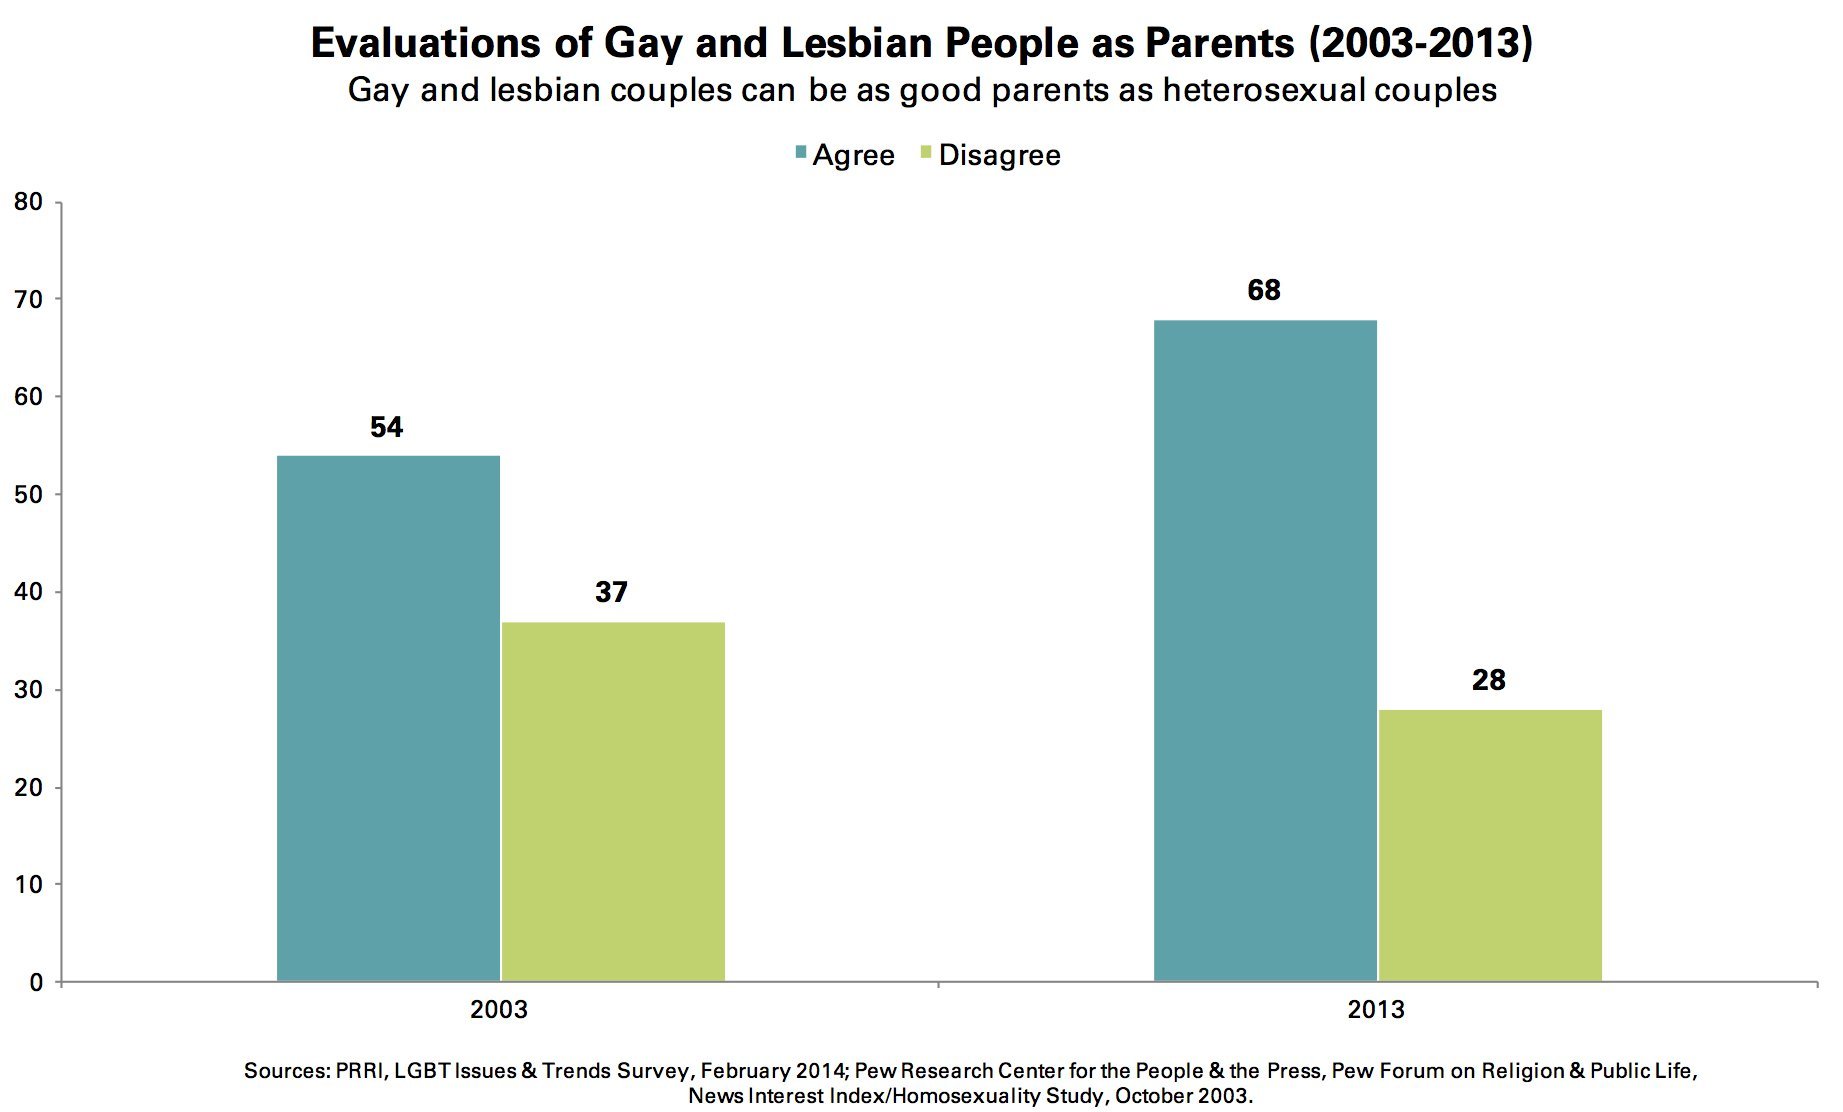 Lesbian and gay parents